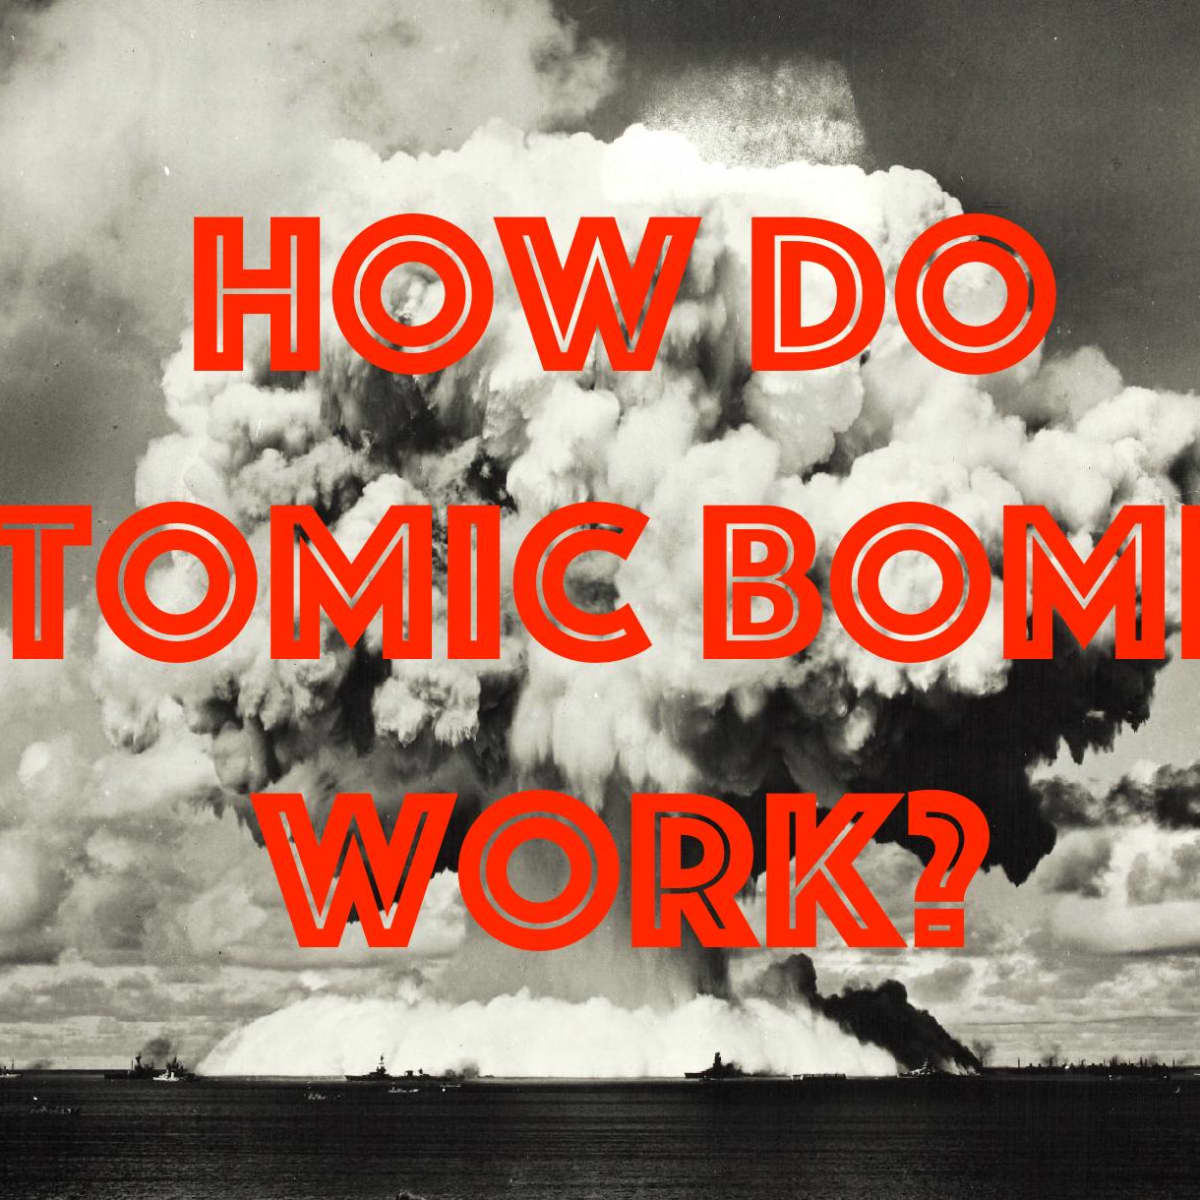 How Do Atomic Bombs Work? A Simple Overview - Owlcation